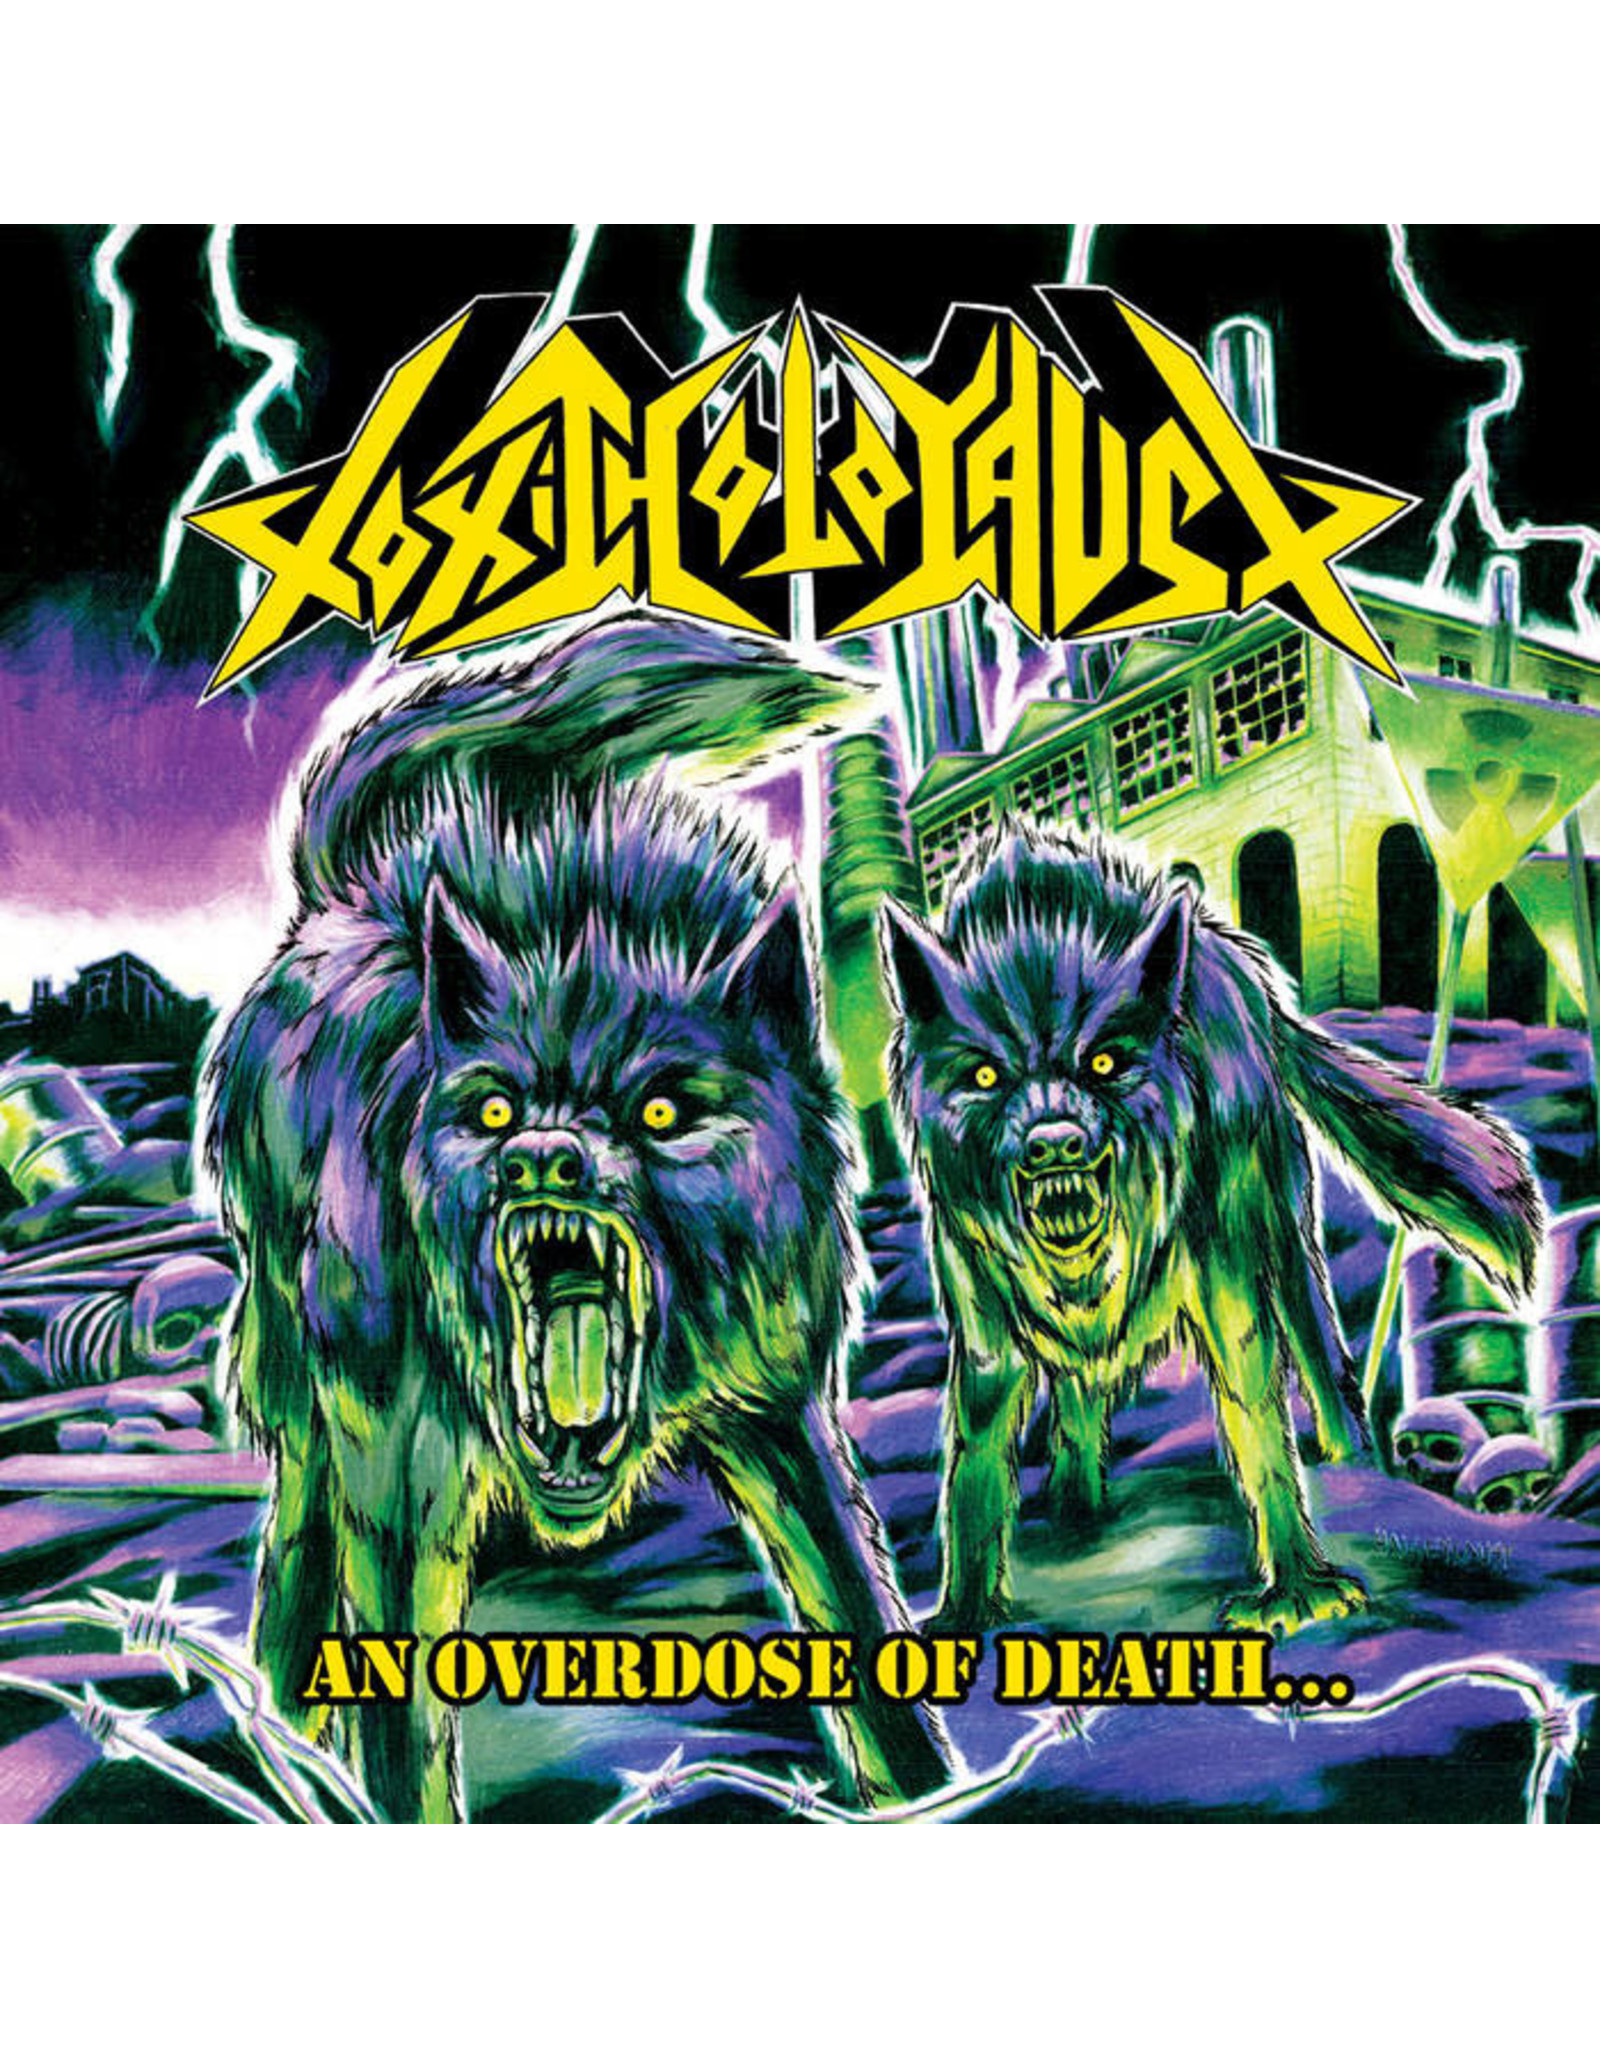 Toxic Holocaust - An Overdose Of Death LP (Neon Yellow, Green and Violet Striped Edition)